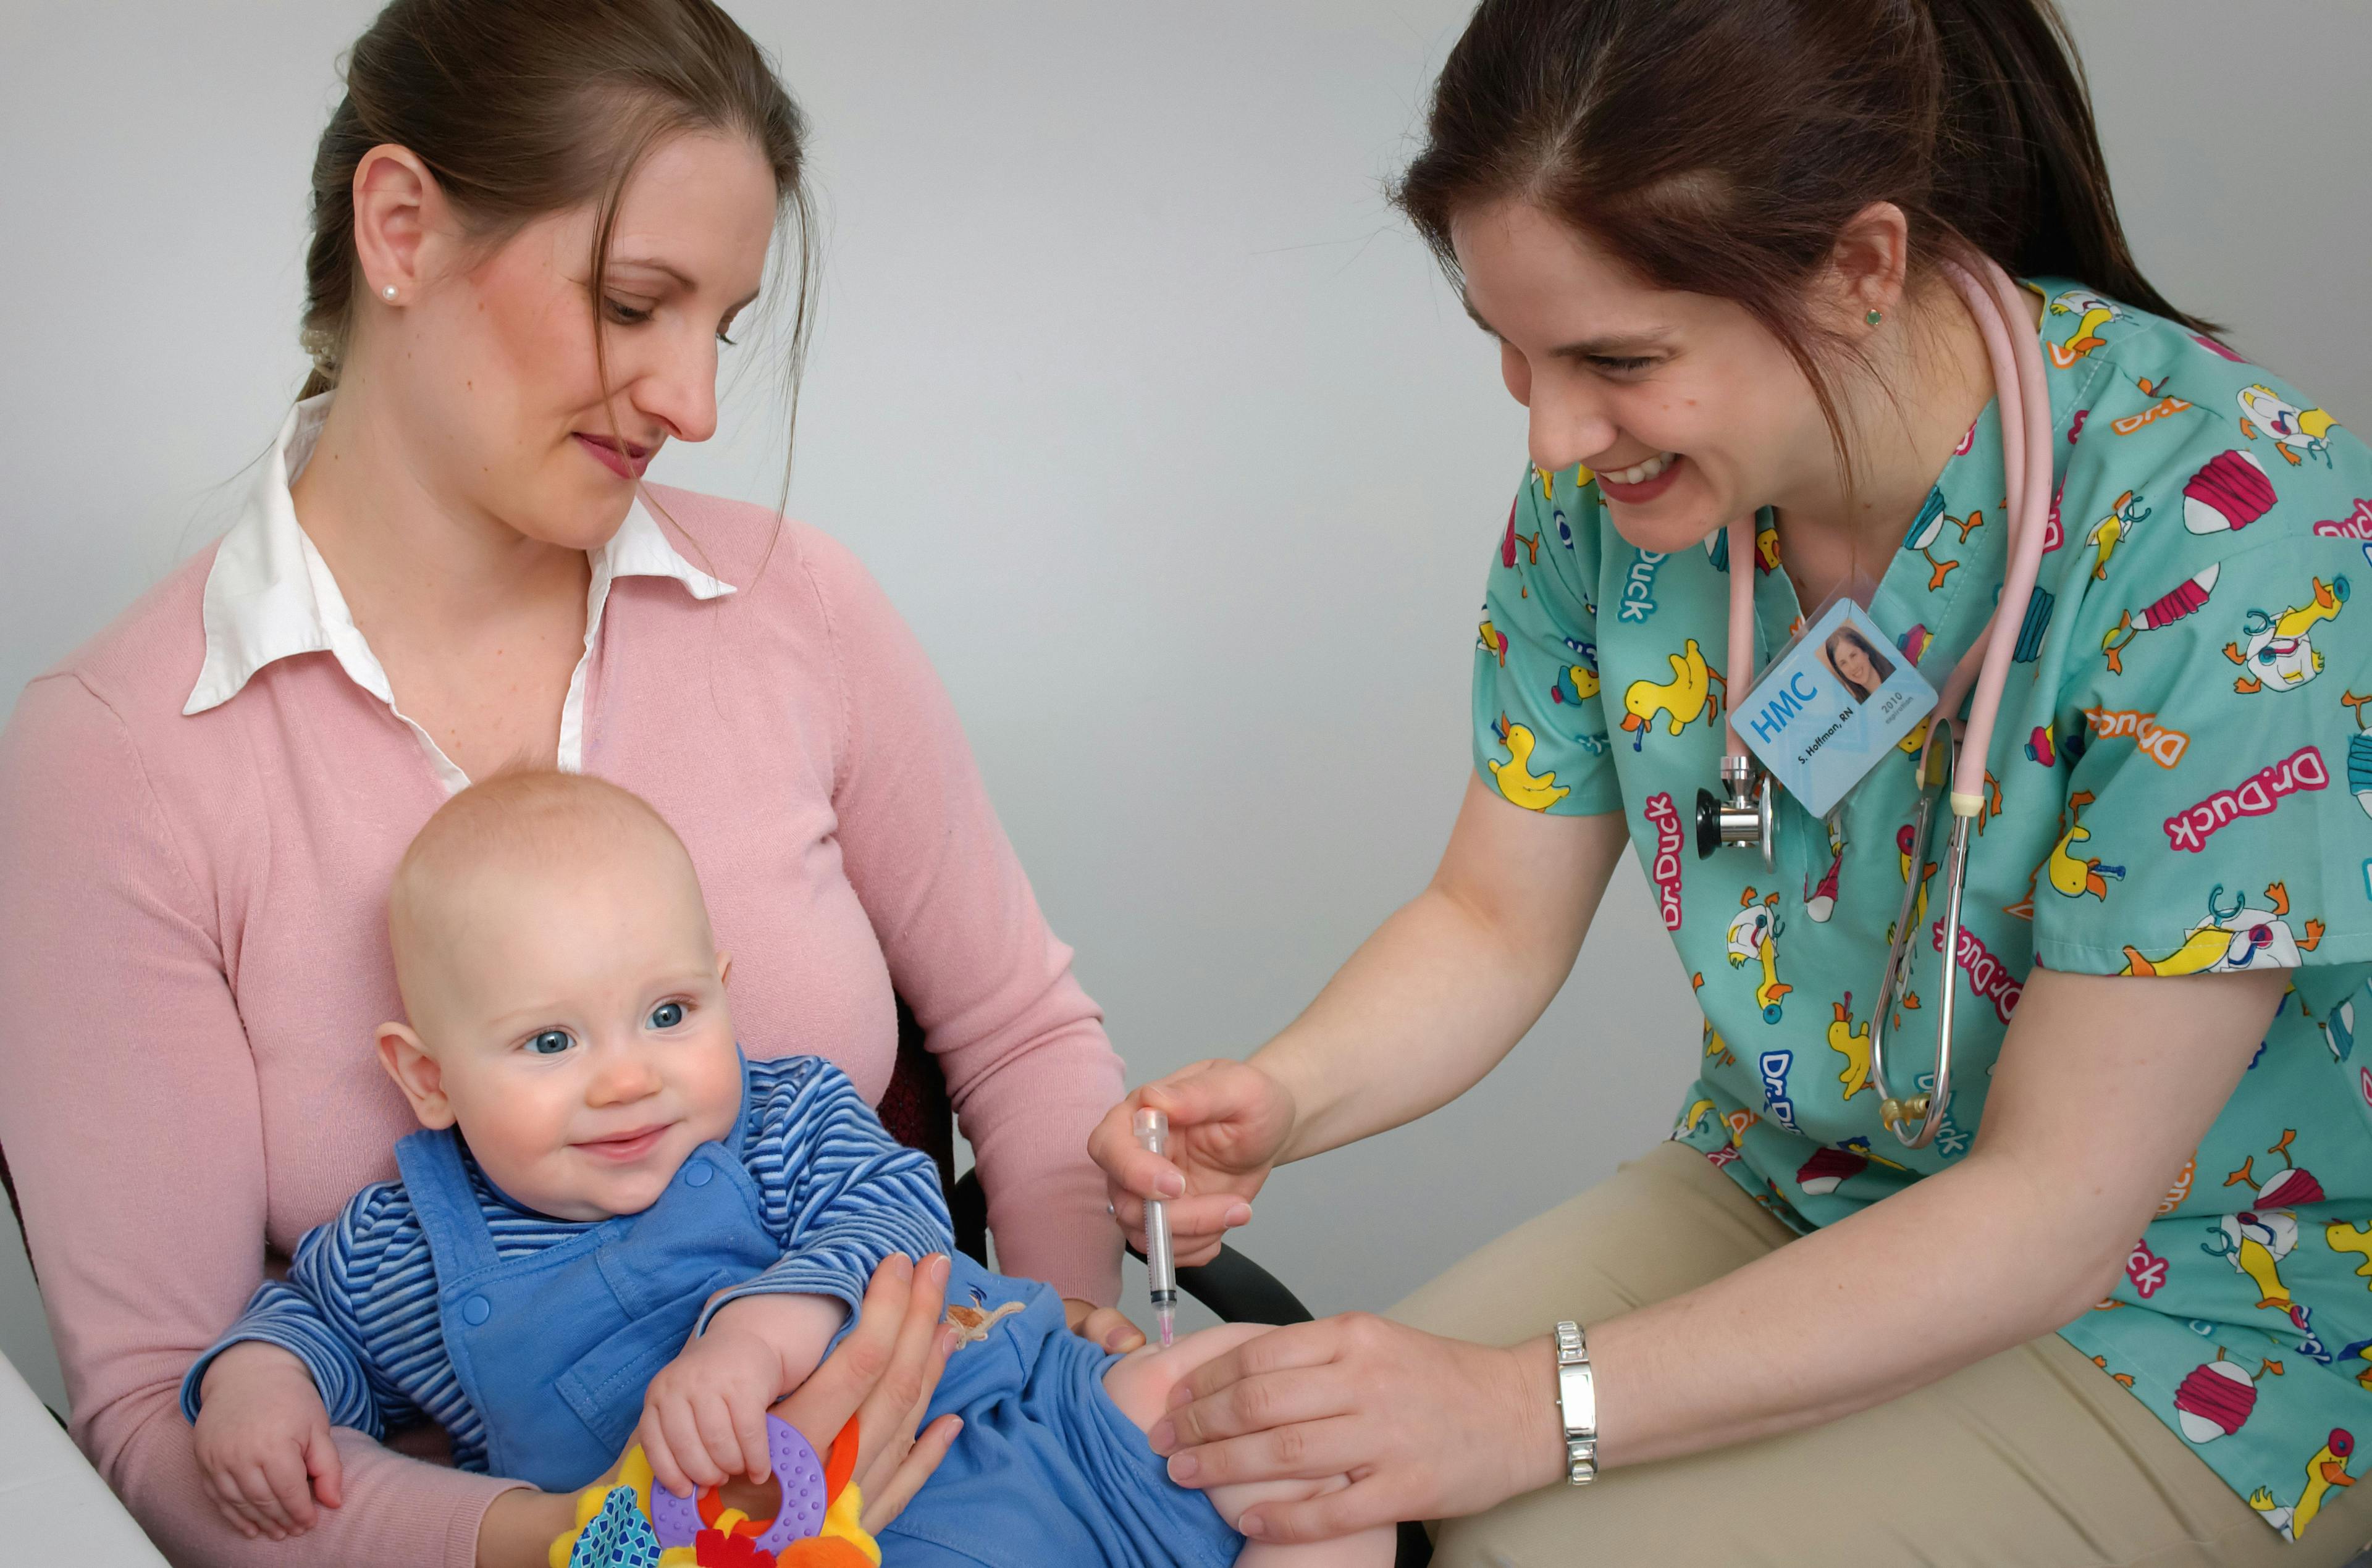 Quadrivalent Influenza Vaccine Safe and Effective for Children 6 Months-5 Years Old